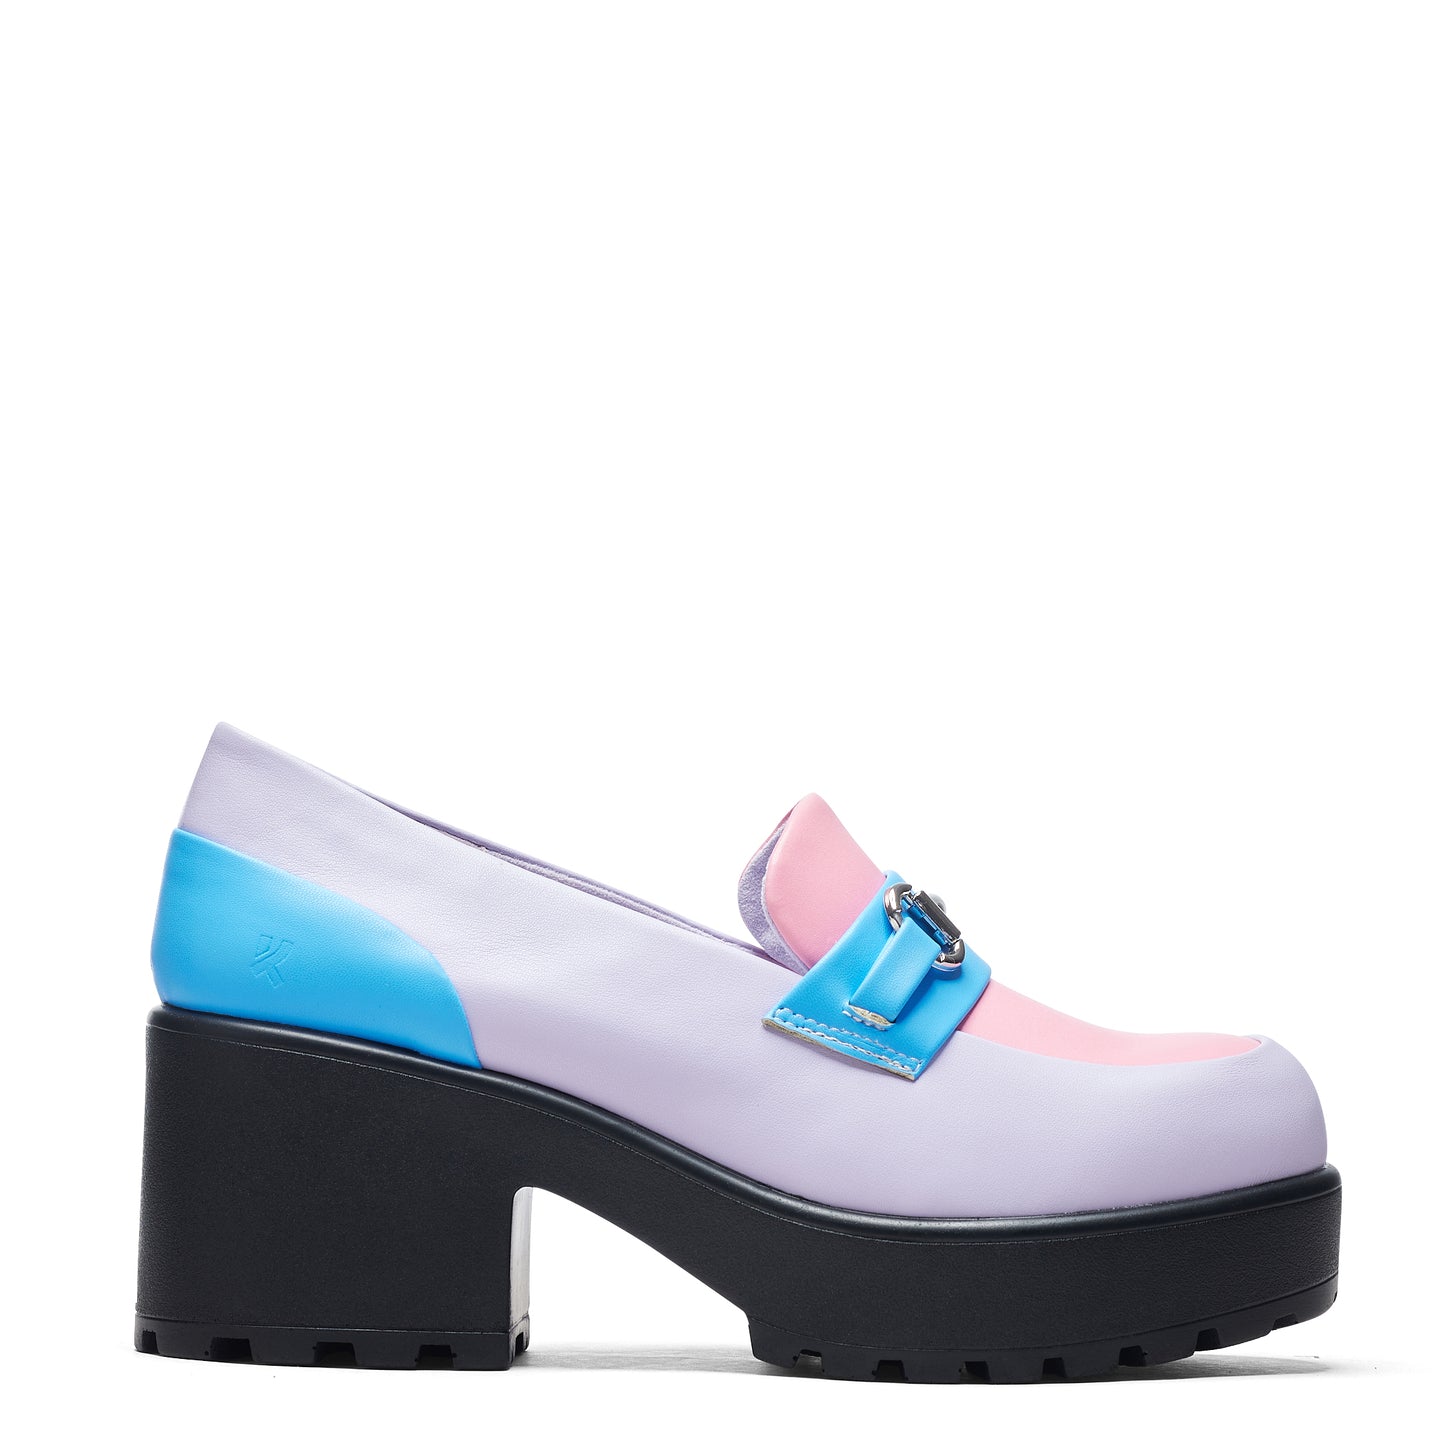 High Class Chunky Shoes - Pink Pastel - Shoes - KOI Footwear - Pink - Side View